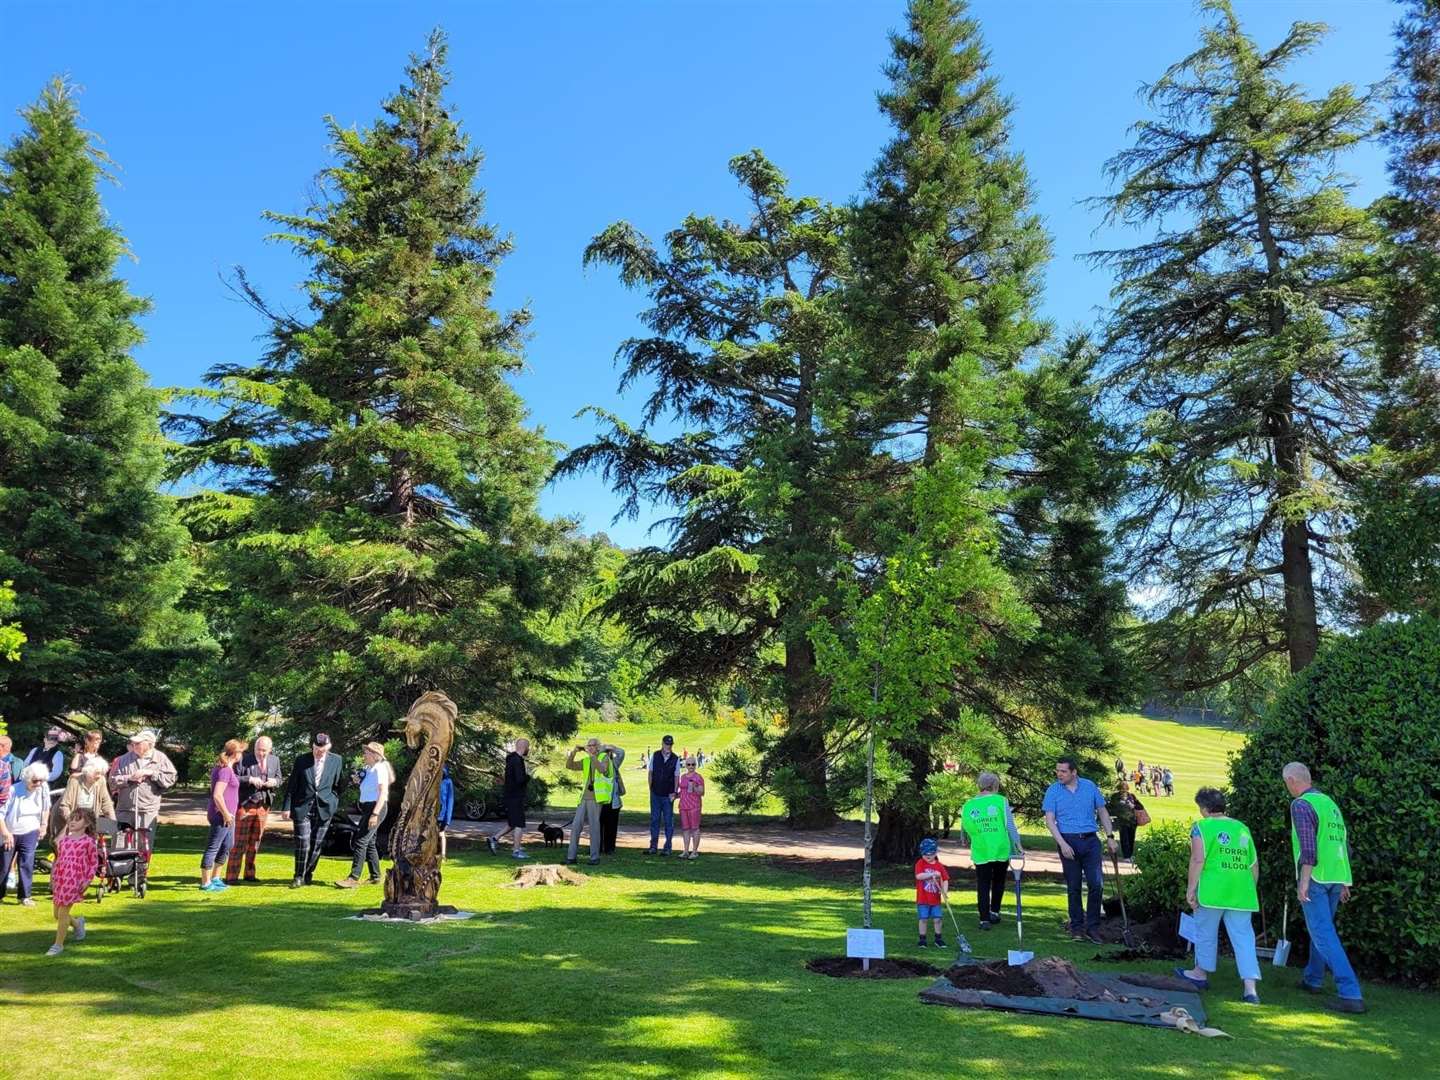 The crowd dispersing after the unicorn unveiling and ceremonial tree planting at the Picnic in the Park on Sunday.